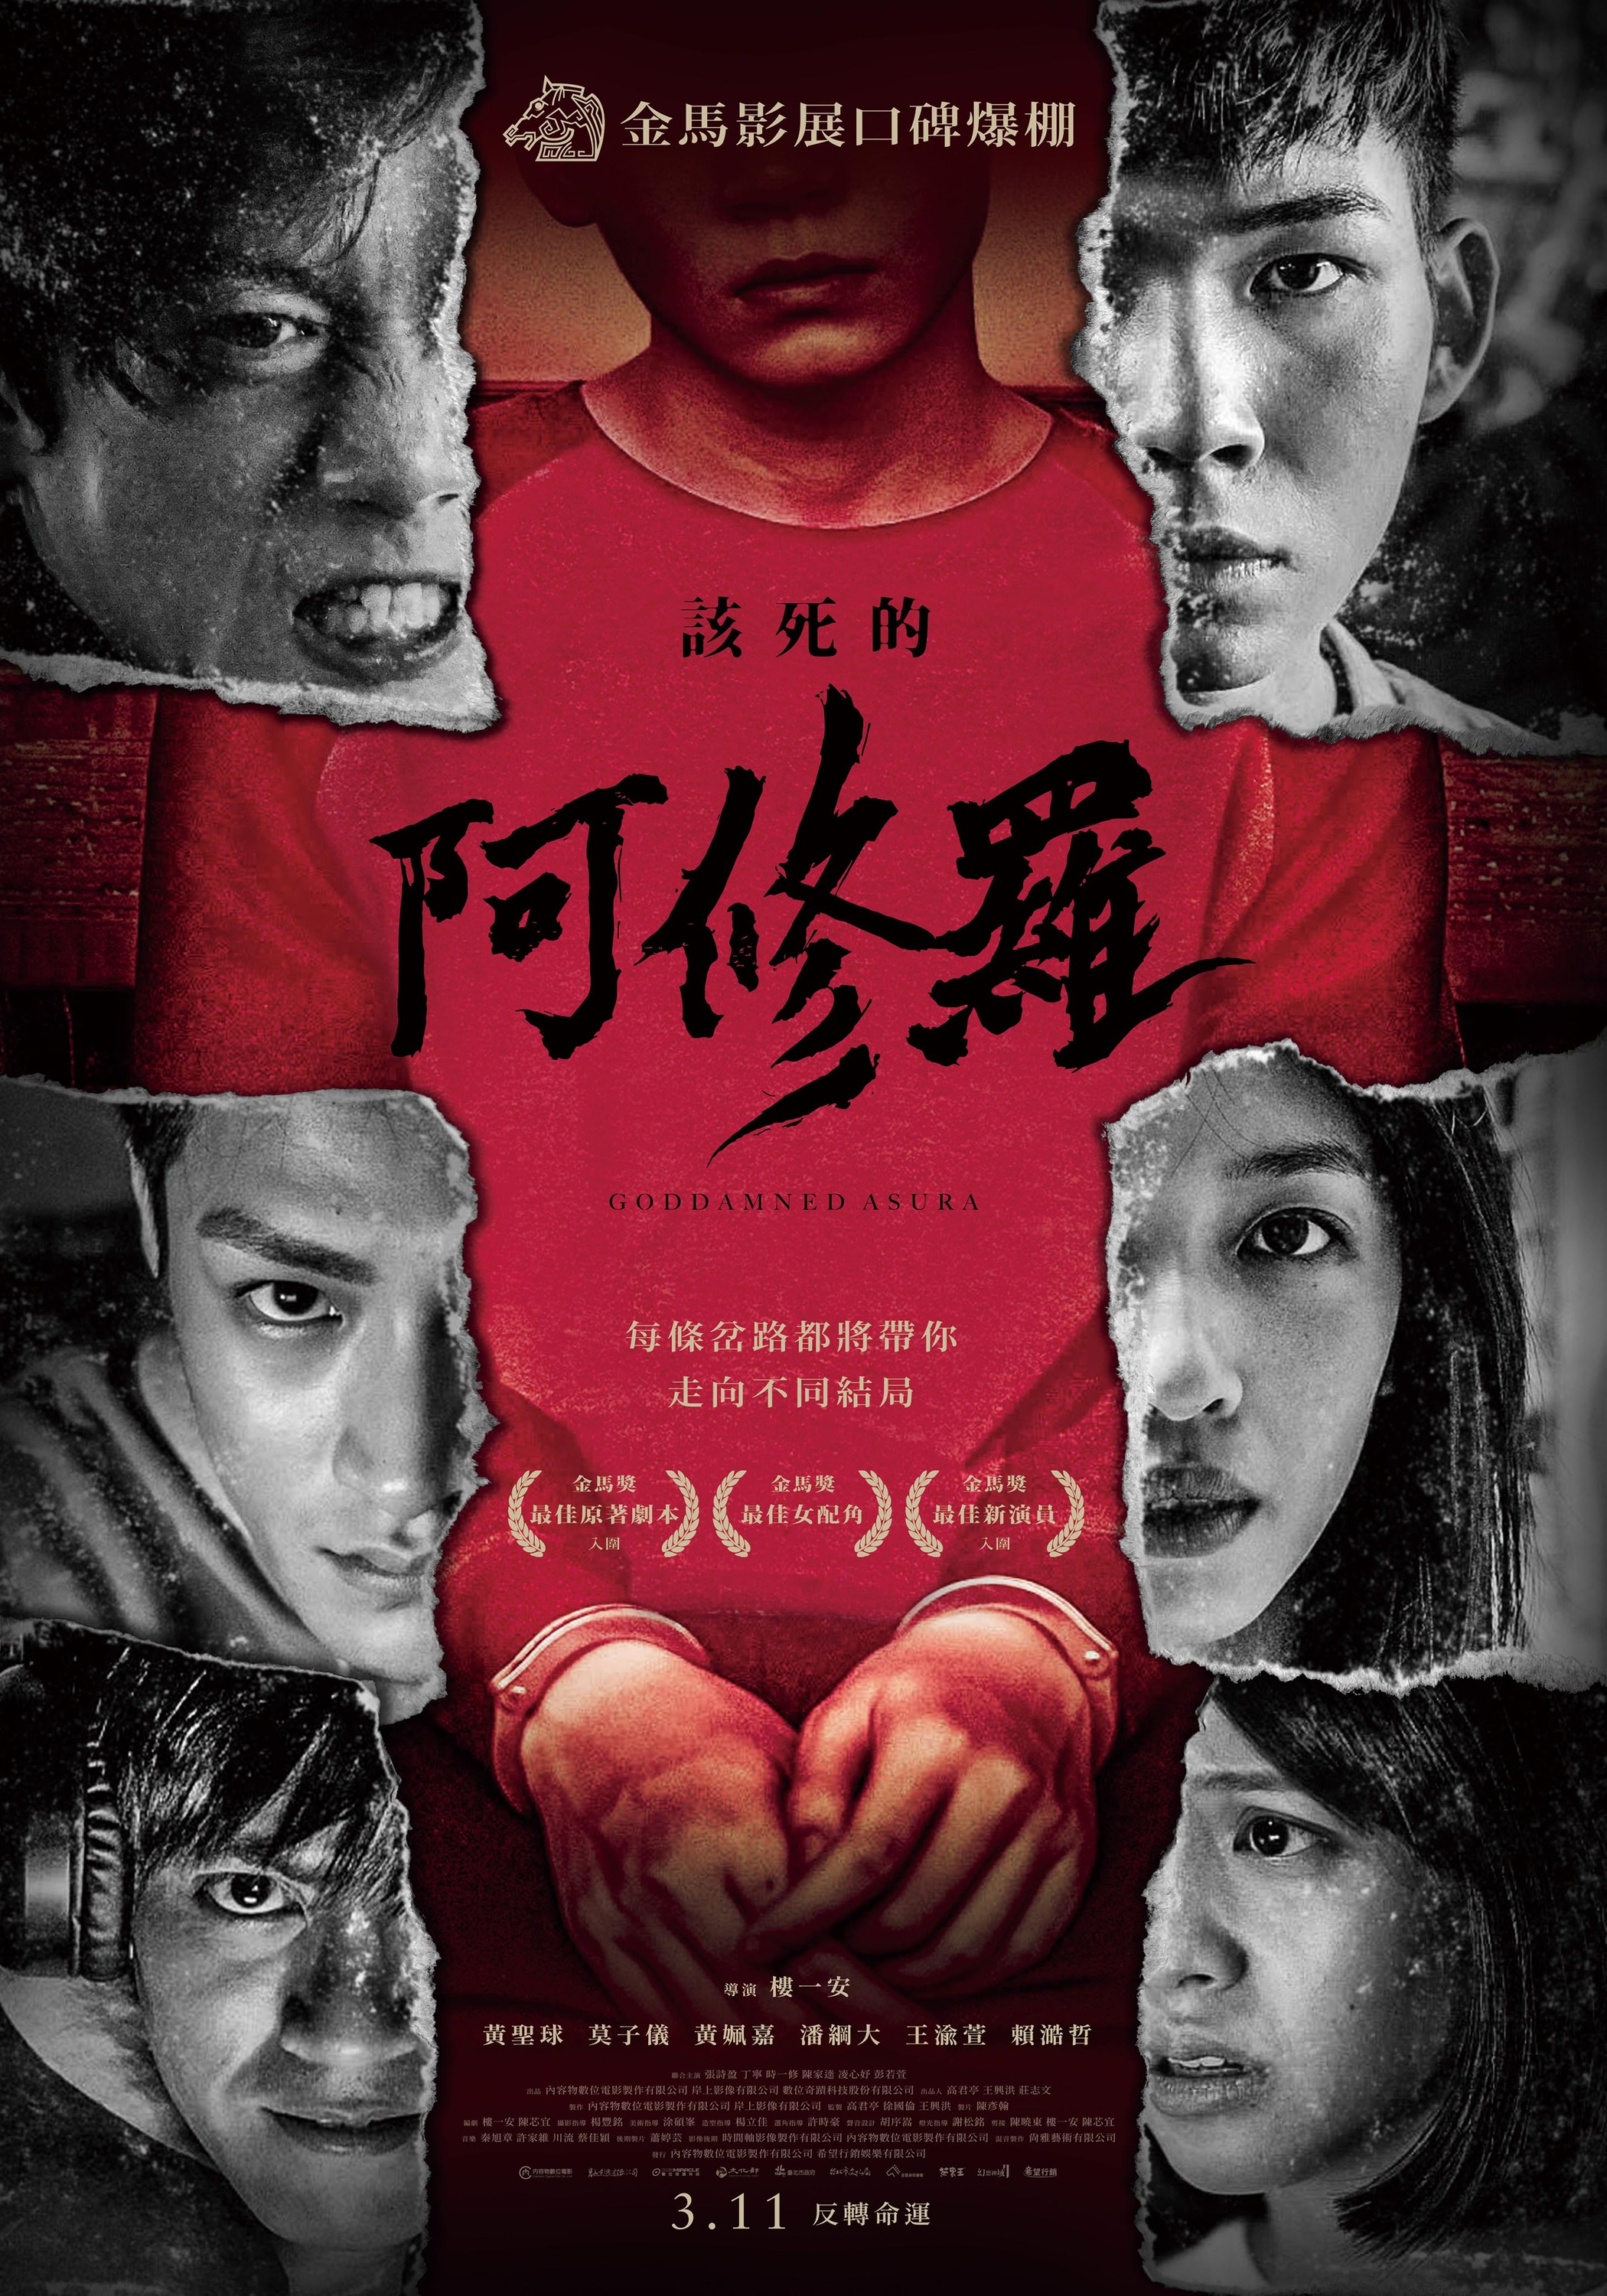 Mega Sized Movie Poster Image for Gai si de a xiu luo (#1 of 2)